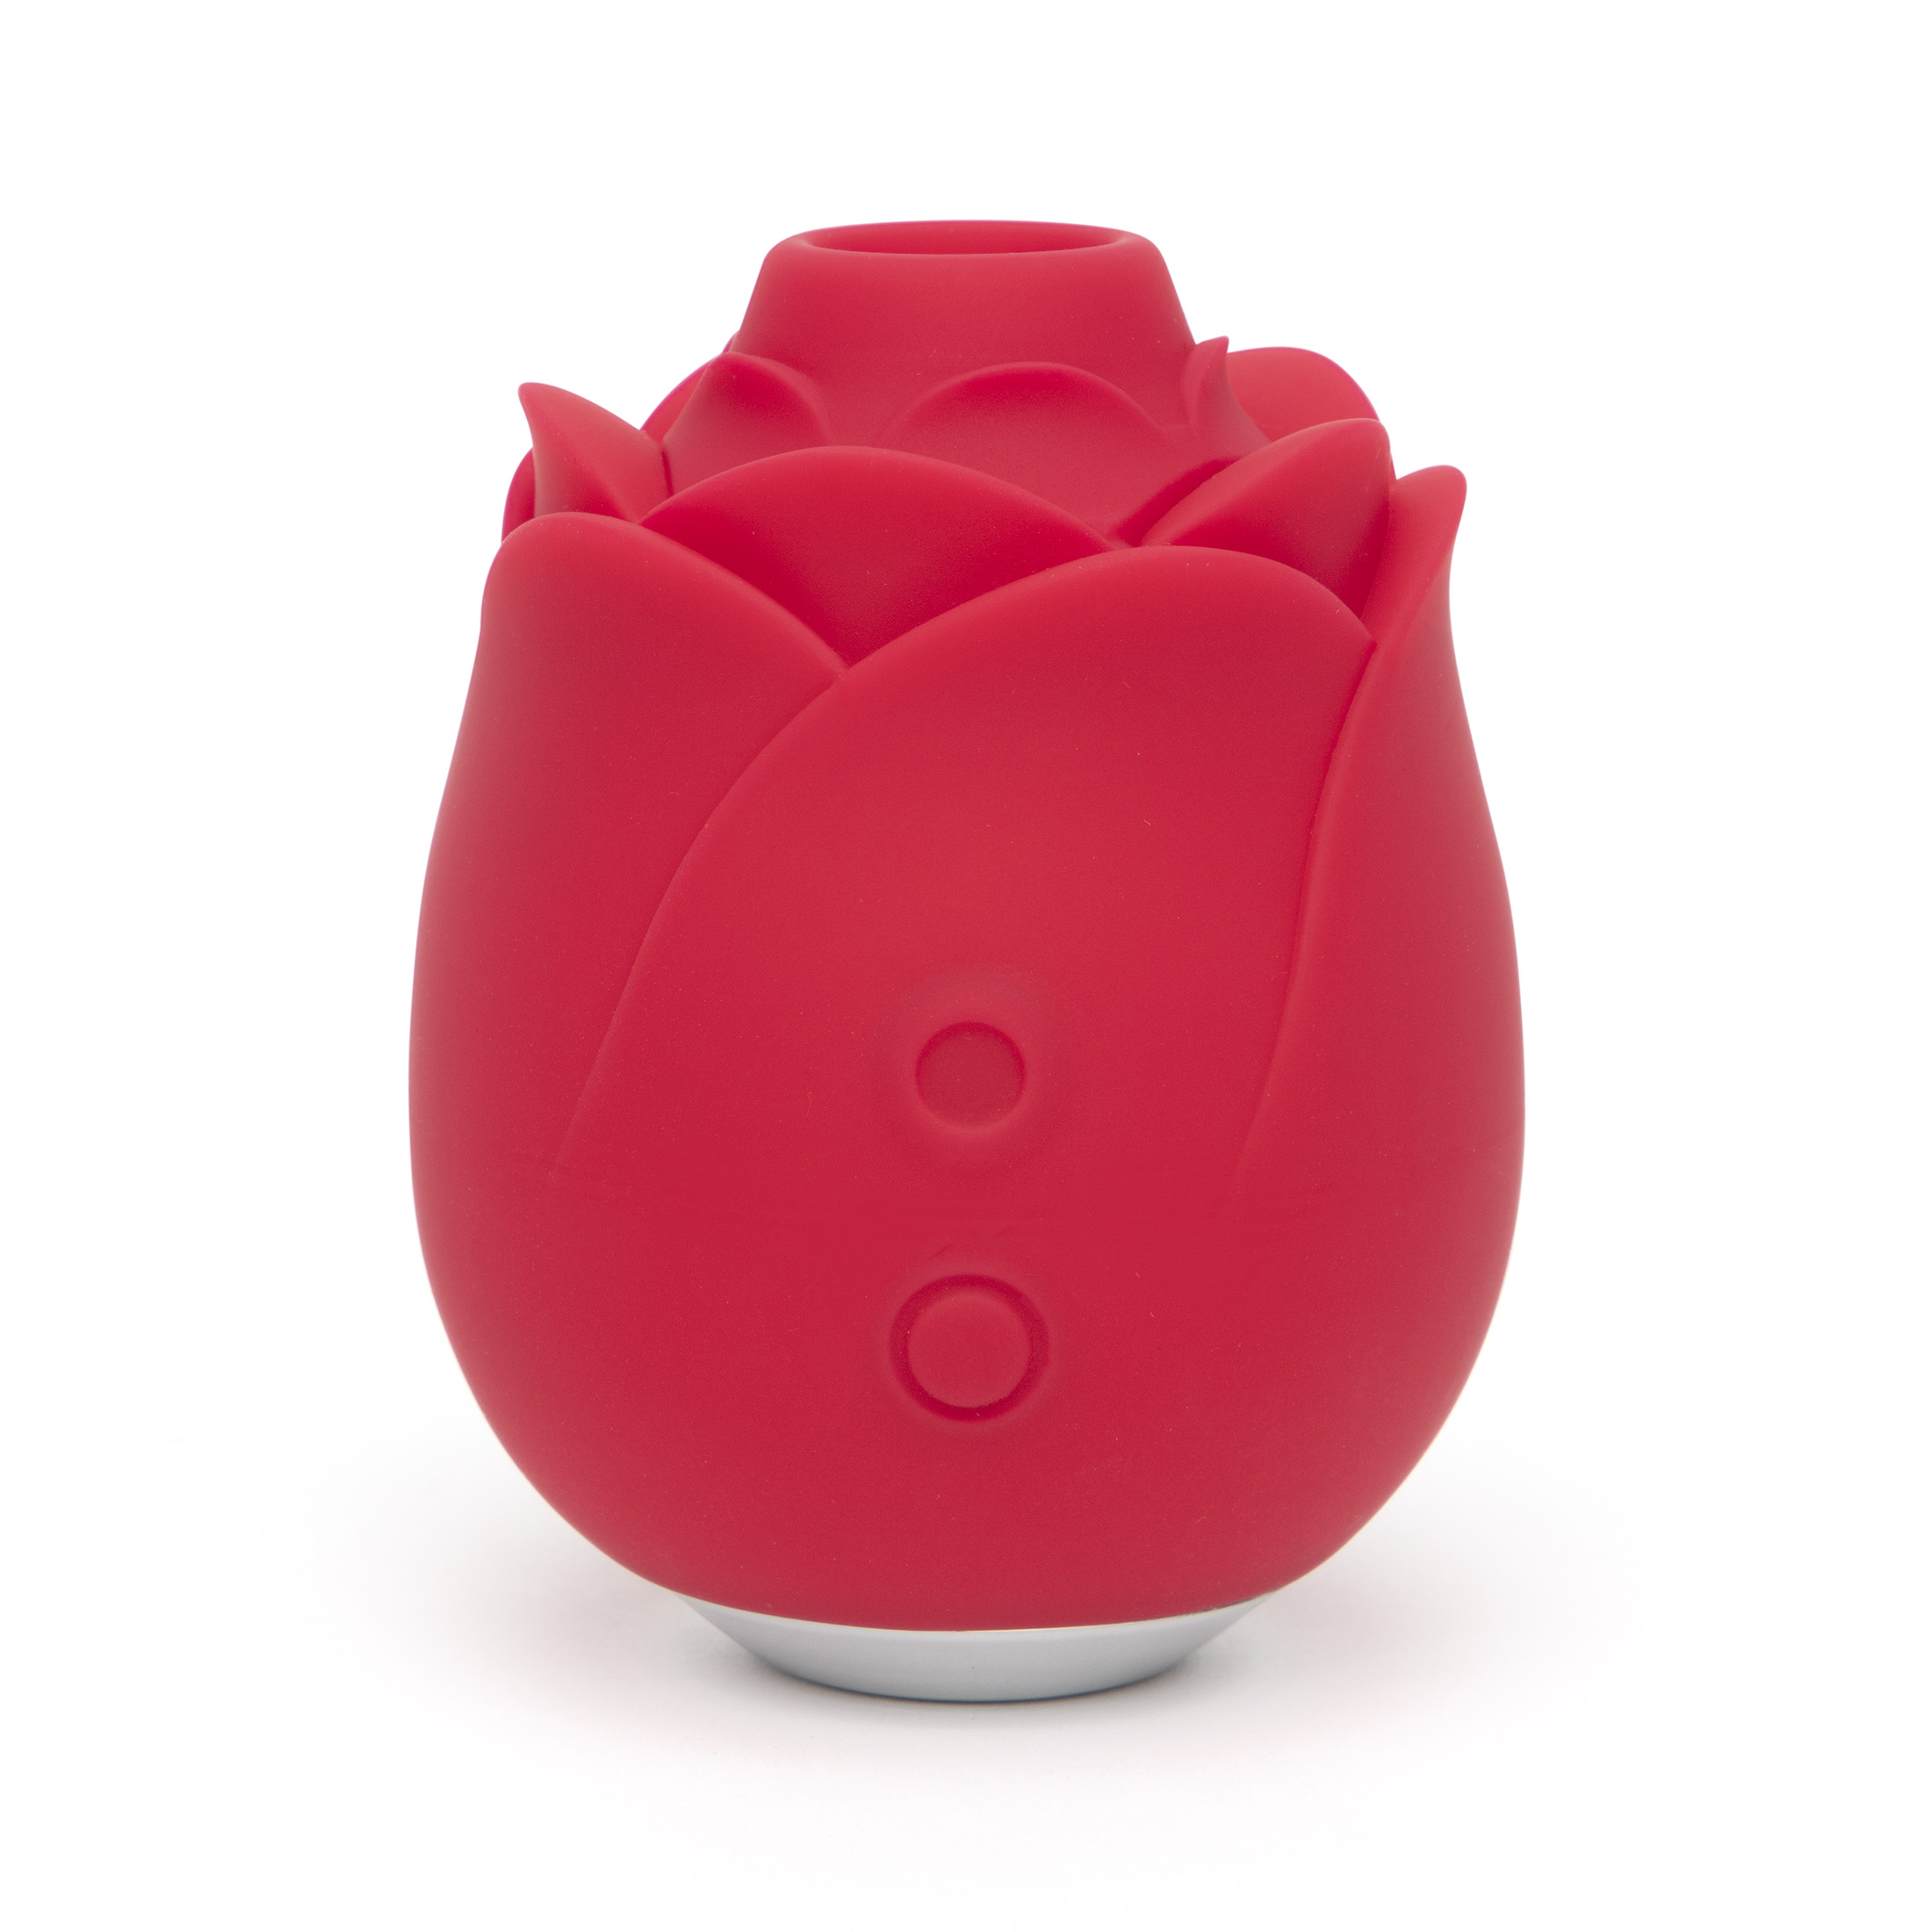 Lovehoney Mon Ami Pleasure Air Suction Vibrating Rose, Red - image 2 of 11